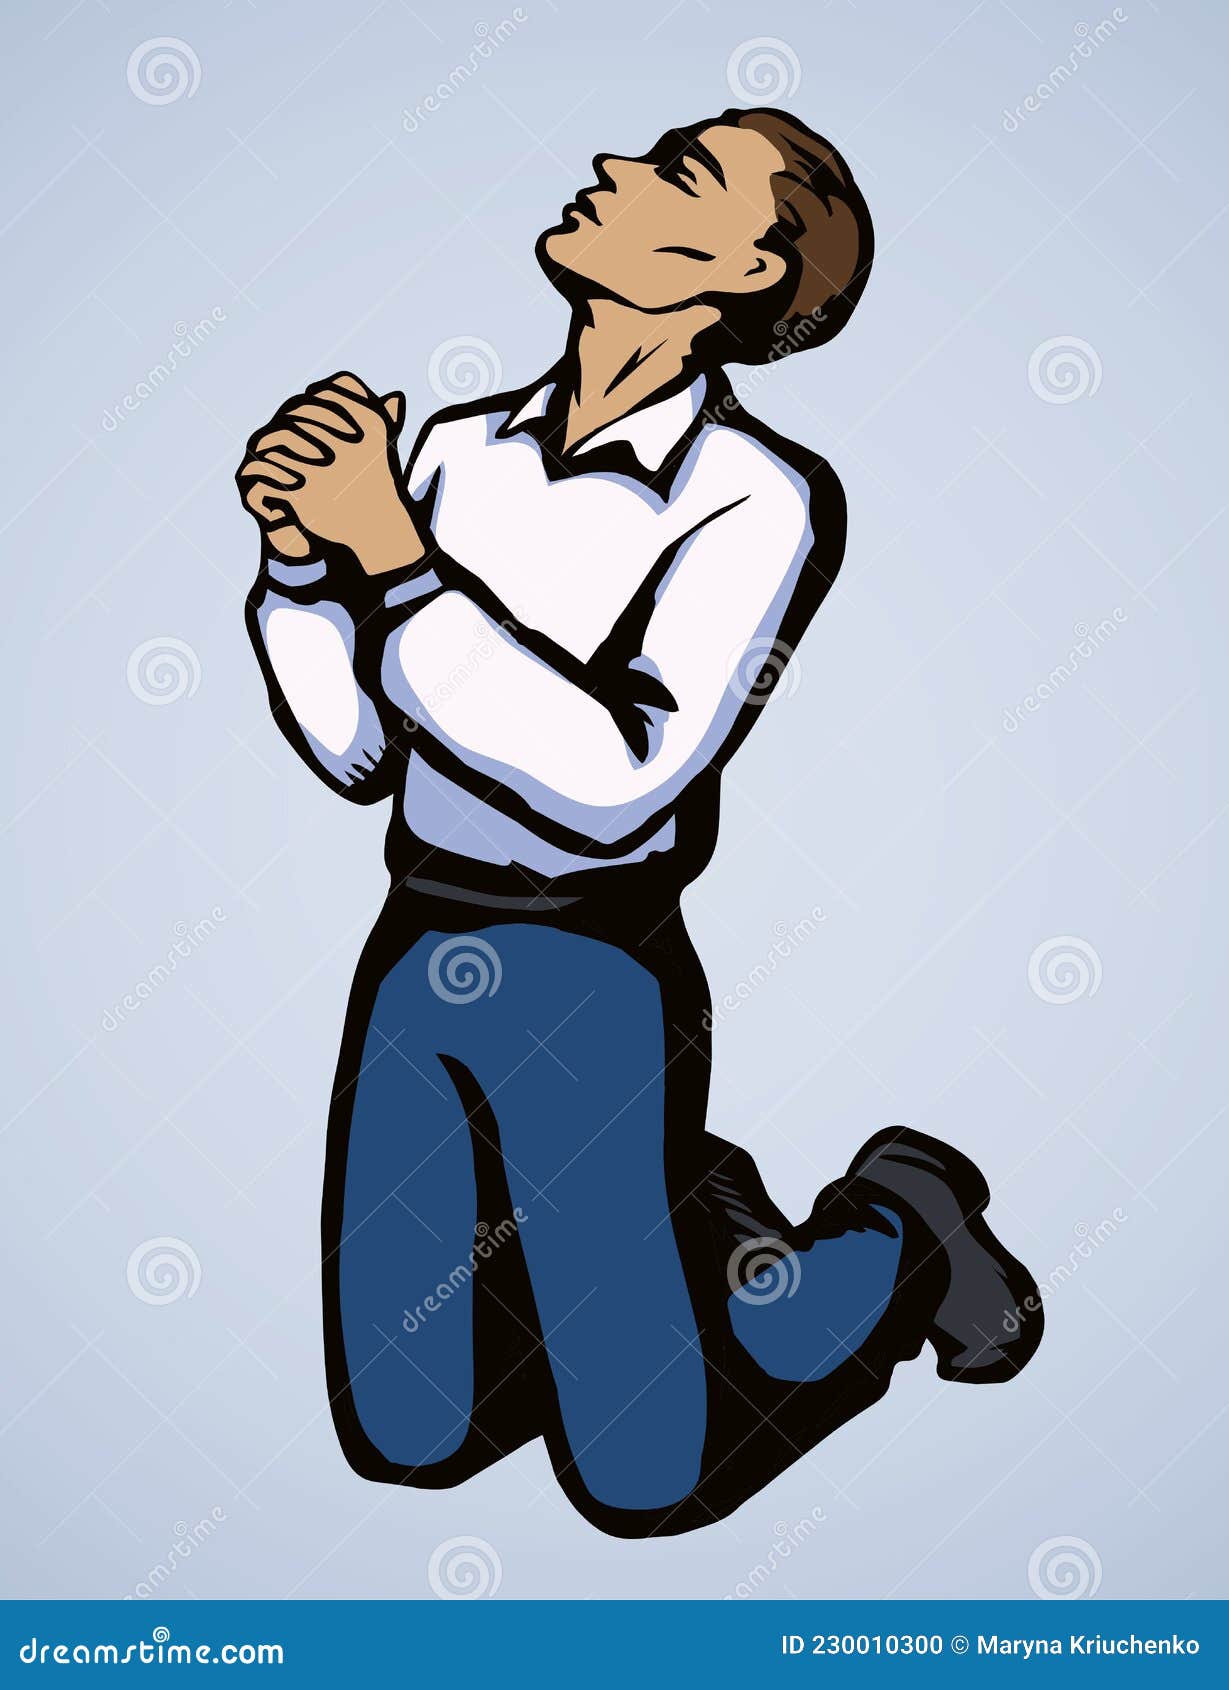 Vector Image of the Praying Person Stock Vector - Illustration of lord ...